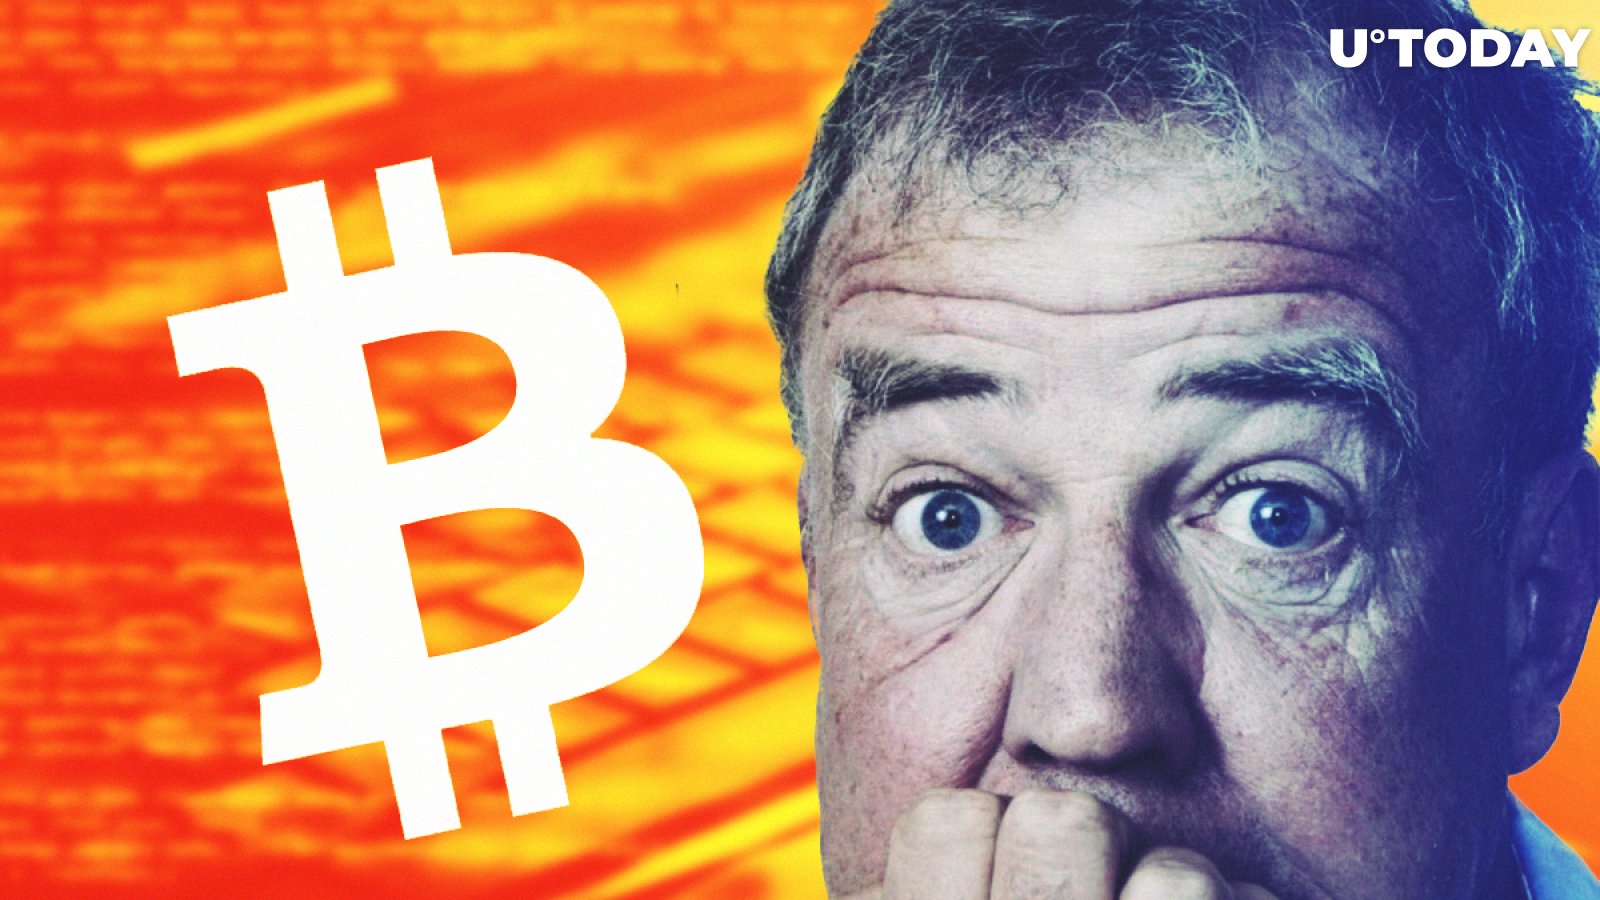 Jeremy Clarkson Gets Involved in Bitcoin Scam, UK Police Issue Warning: Details